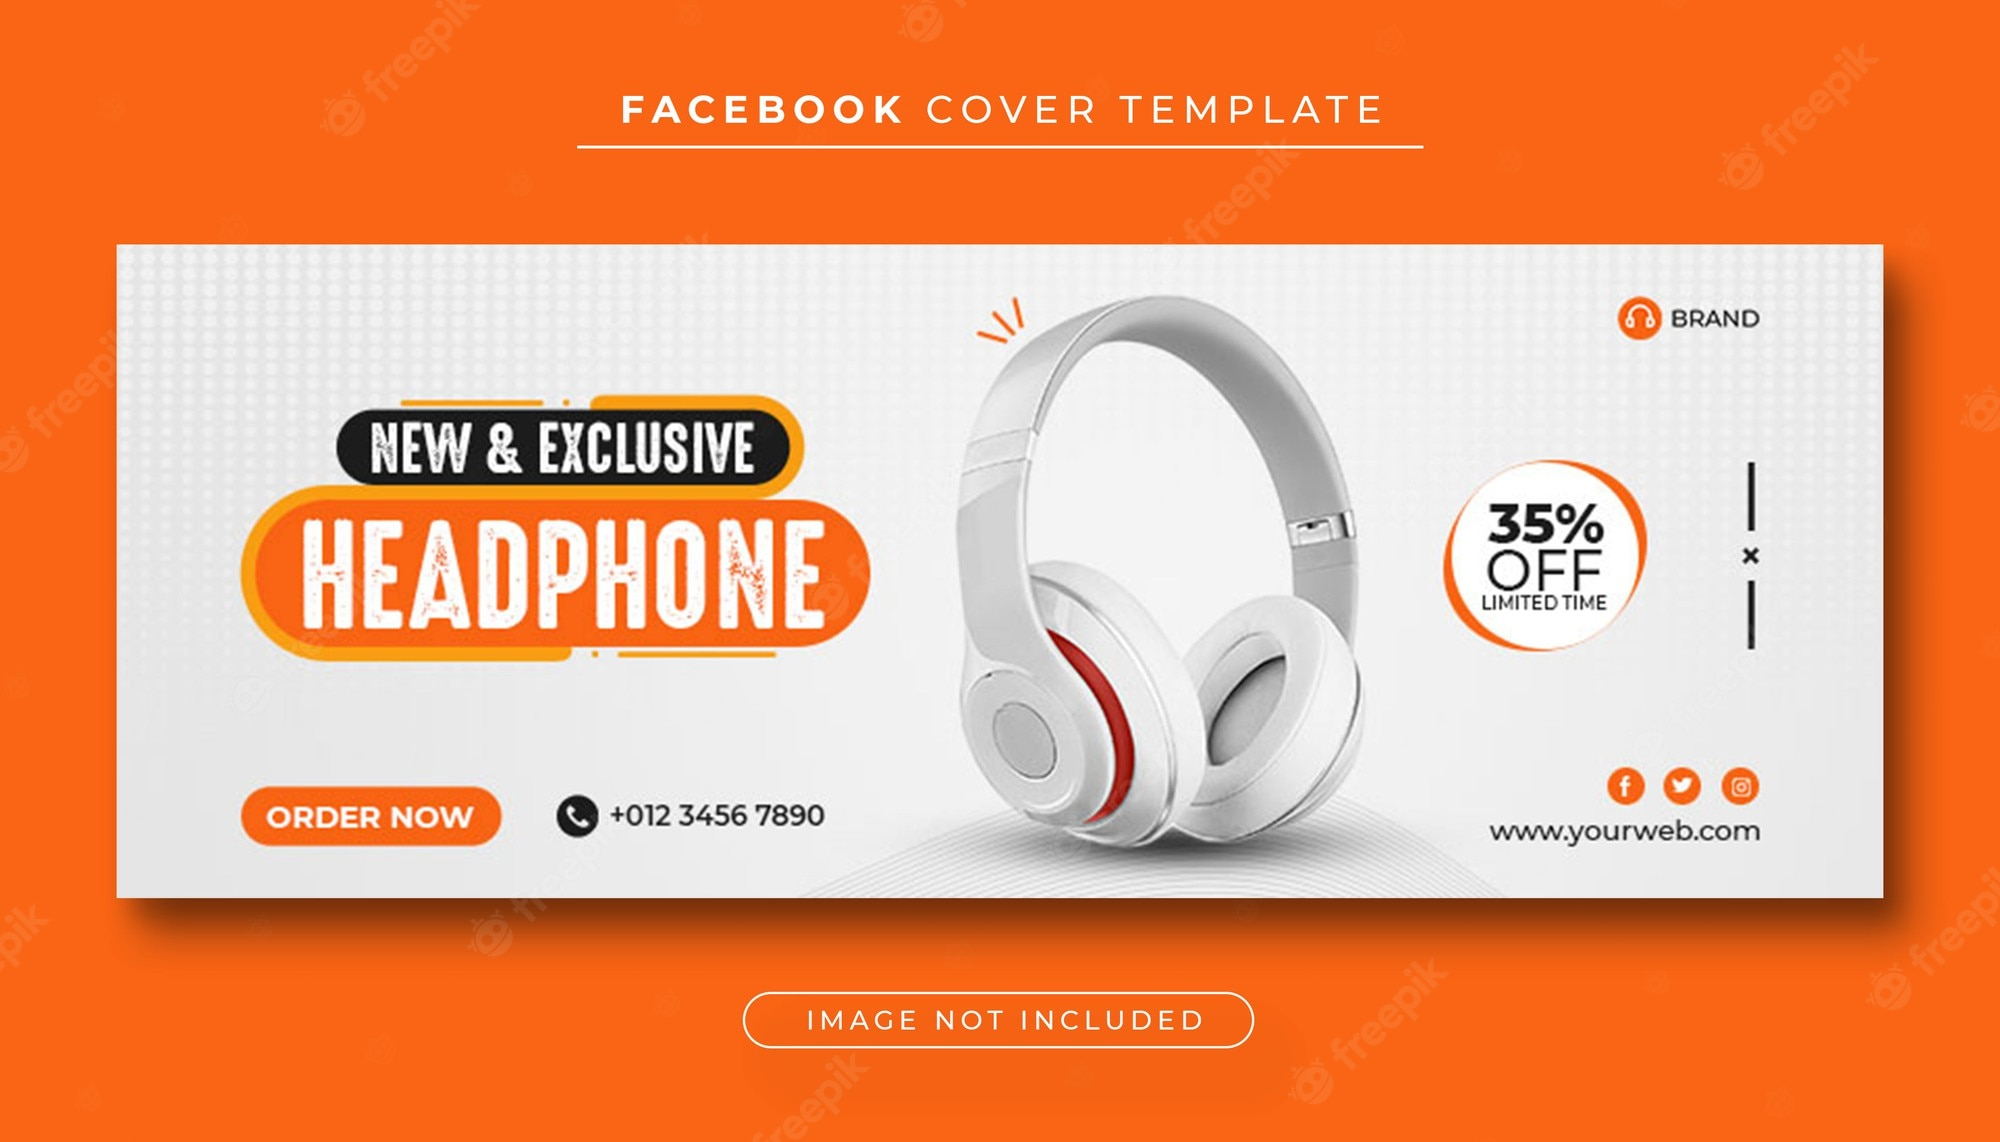 Sale banner Images  Free Vectors, Stock Photos & PSD Throughout Product Banner Template